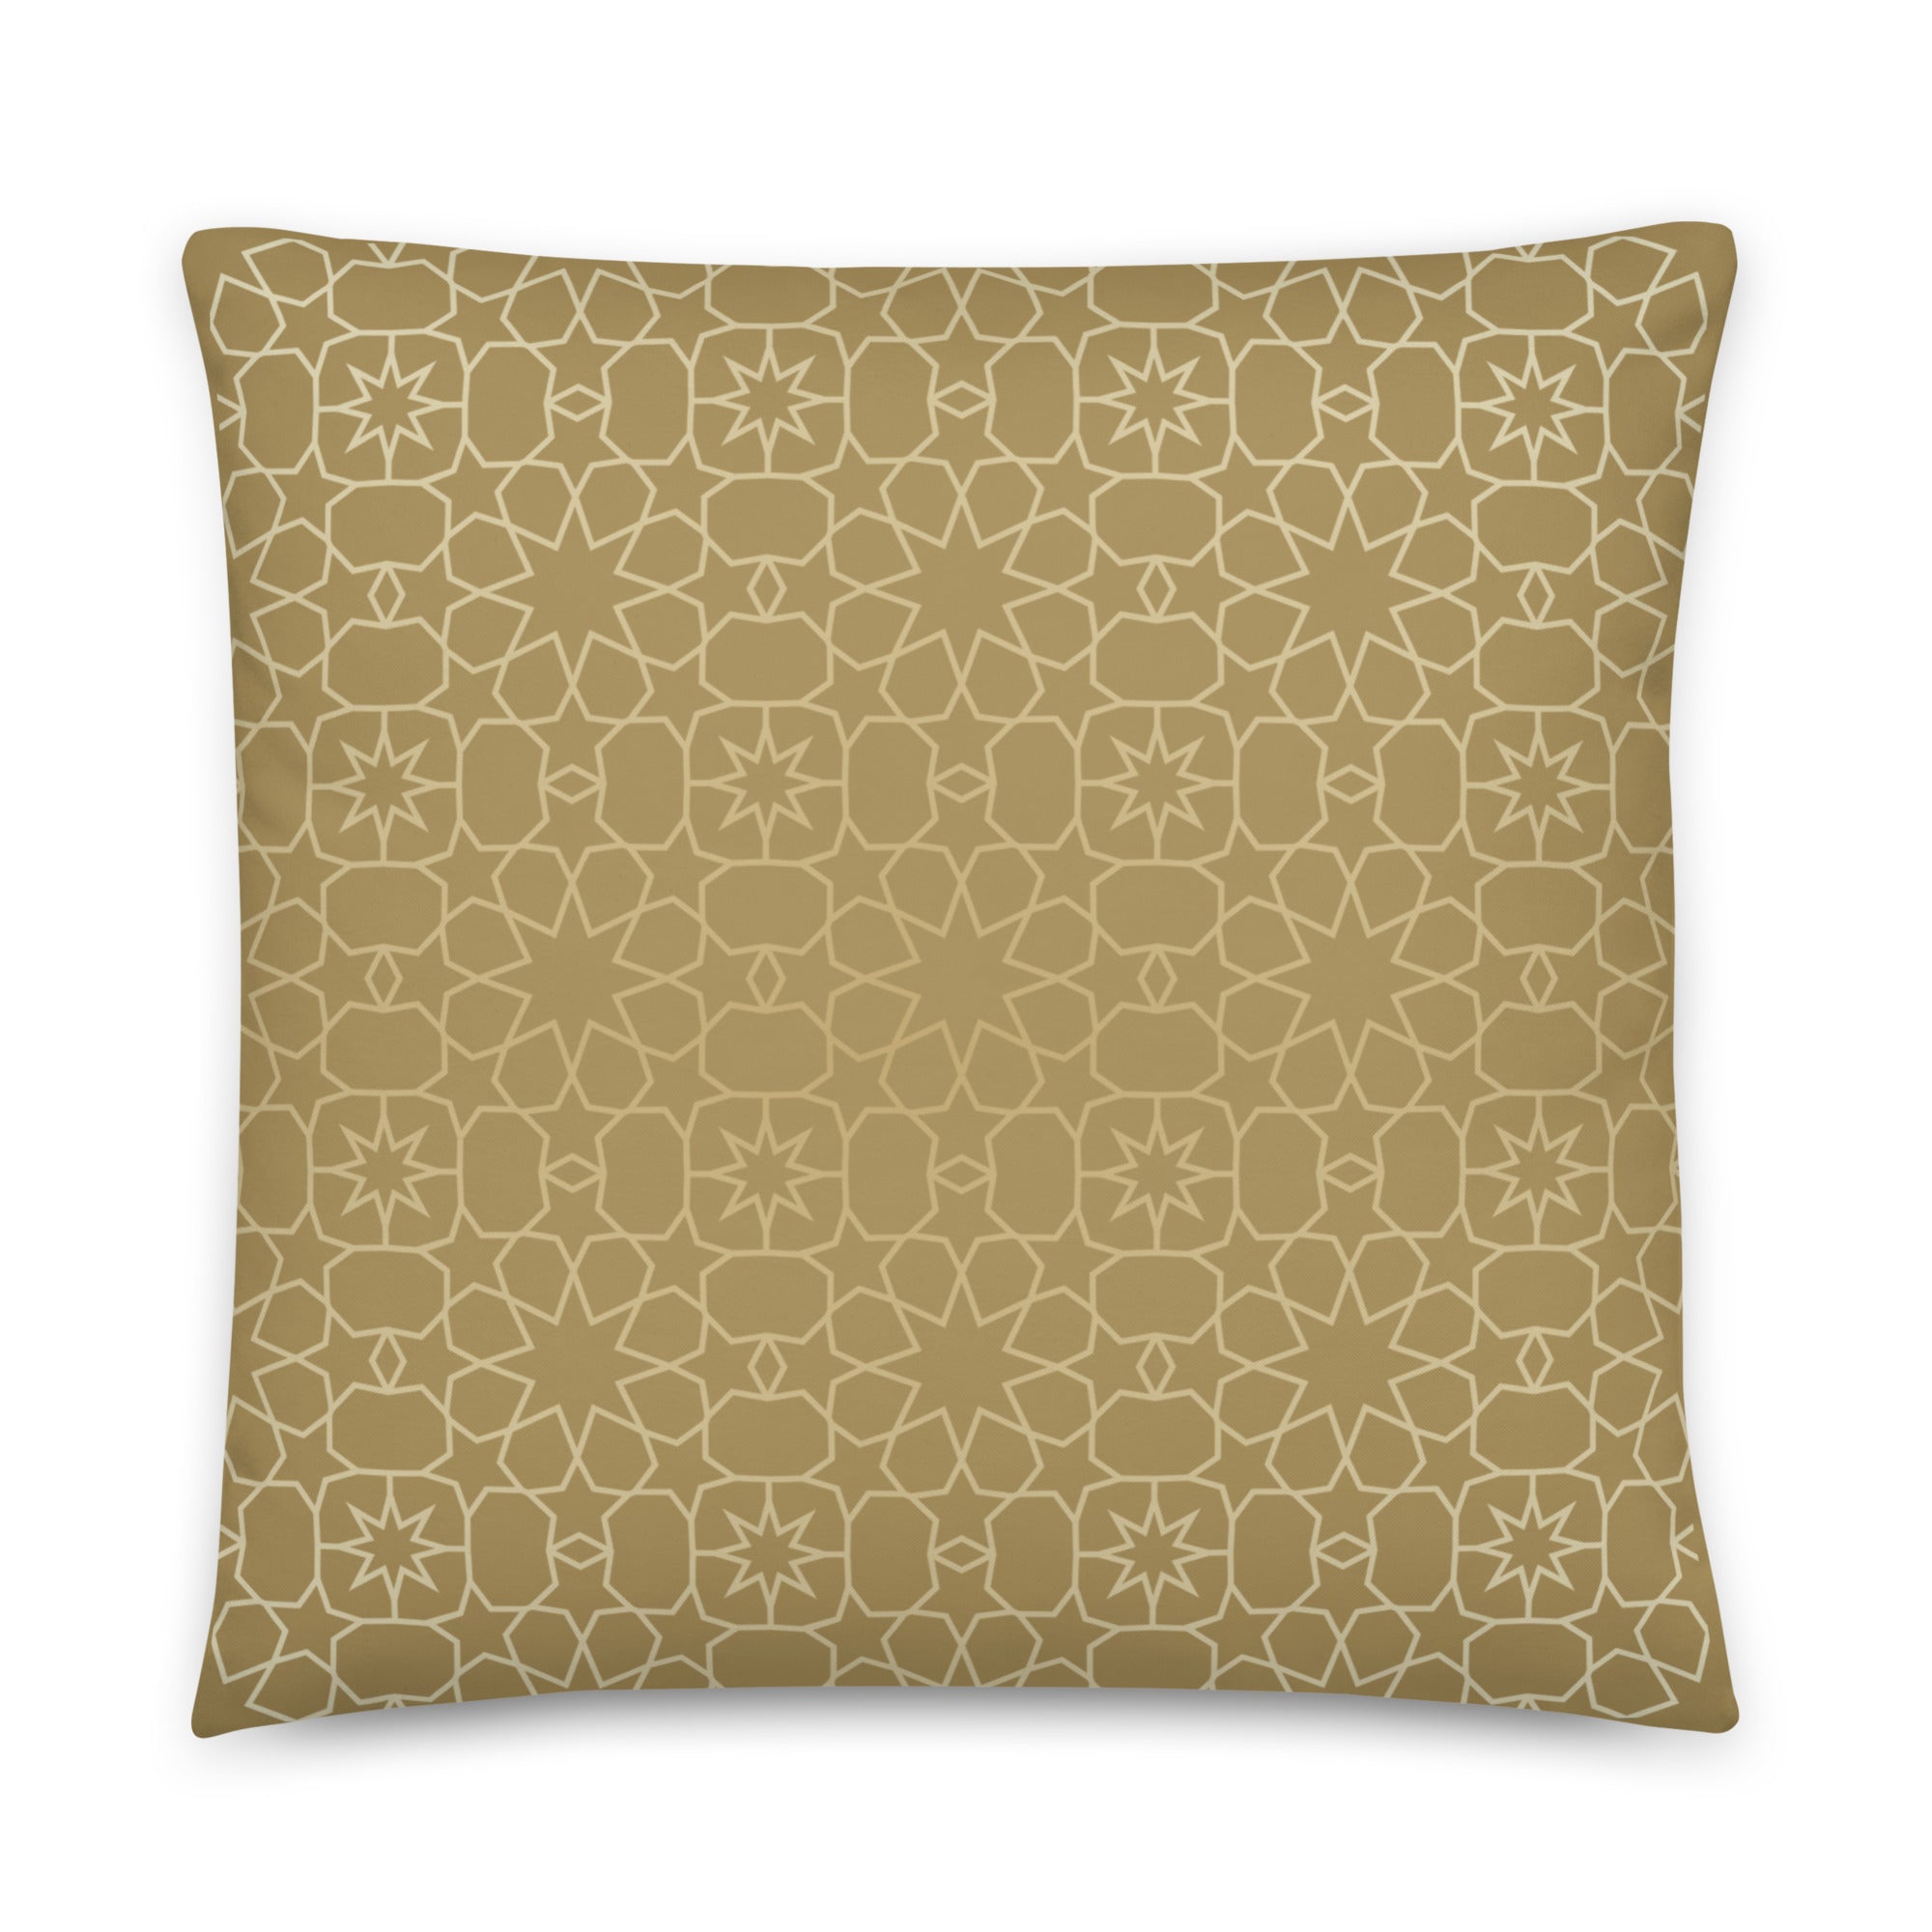 Experience the beauty of geometric artistry with our exquisite printed cushions today.